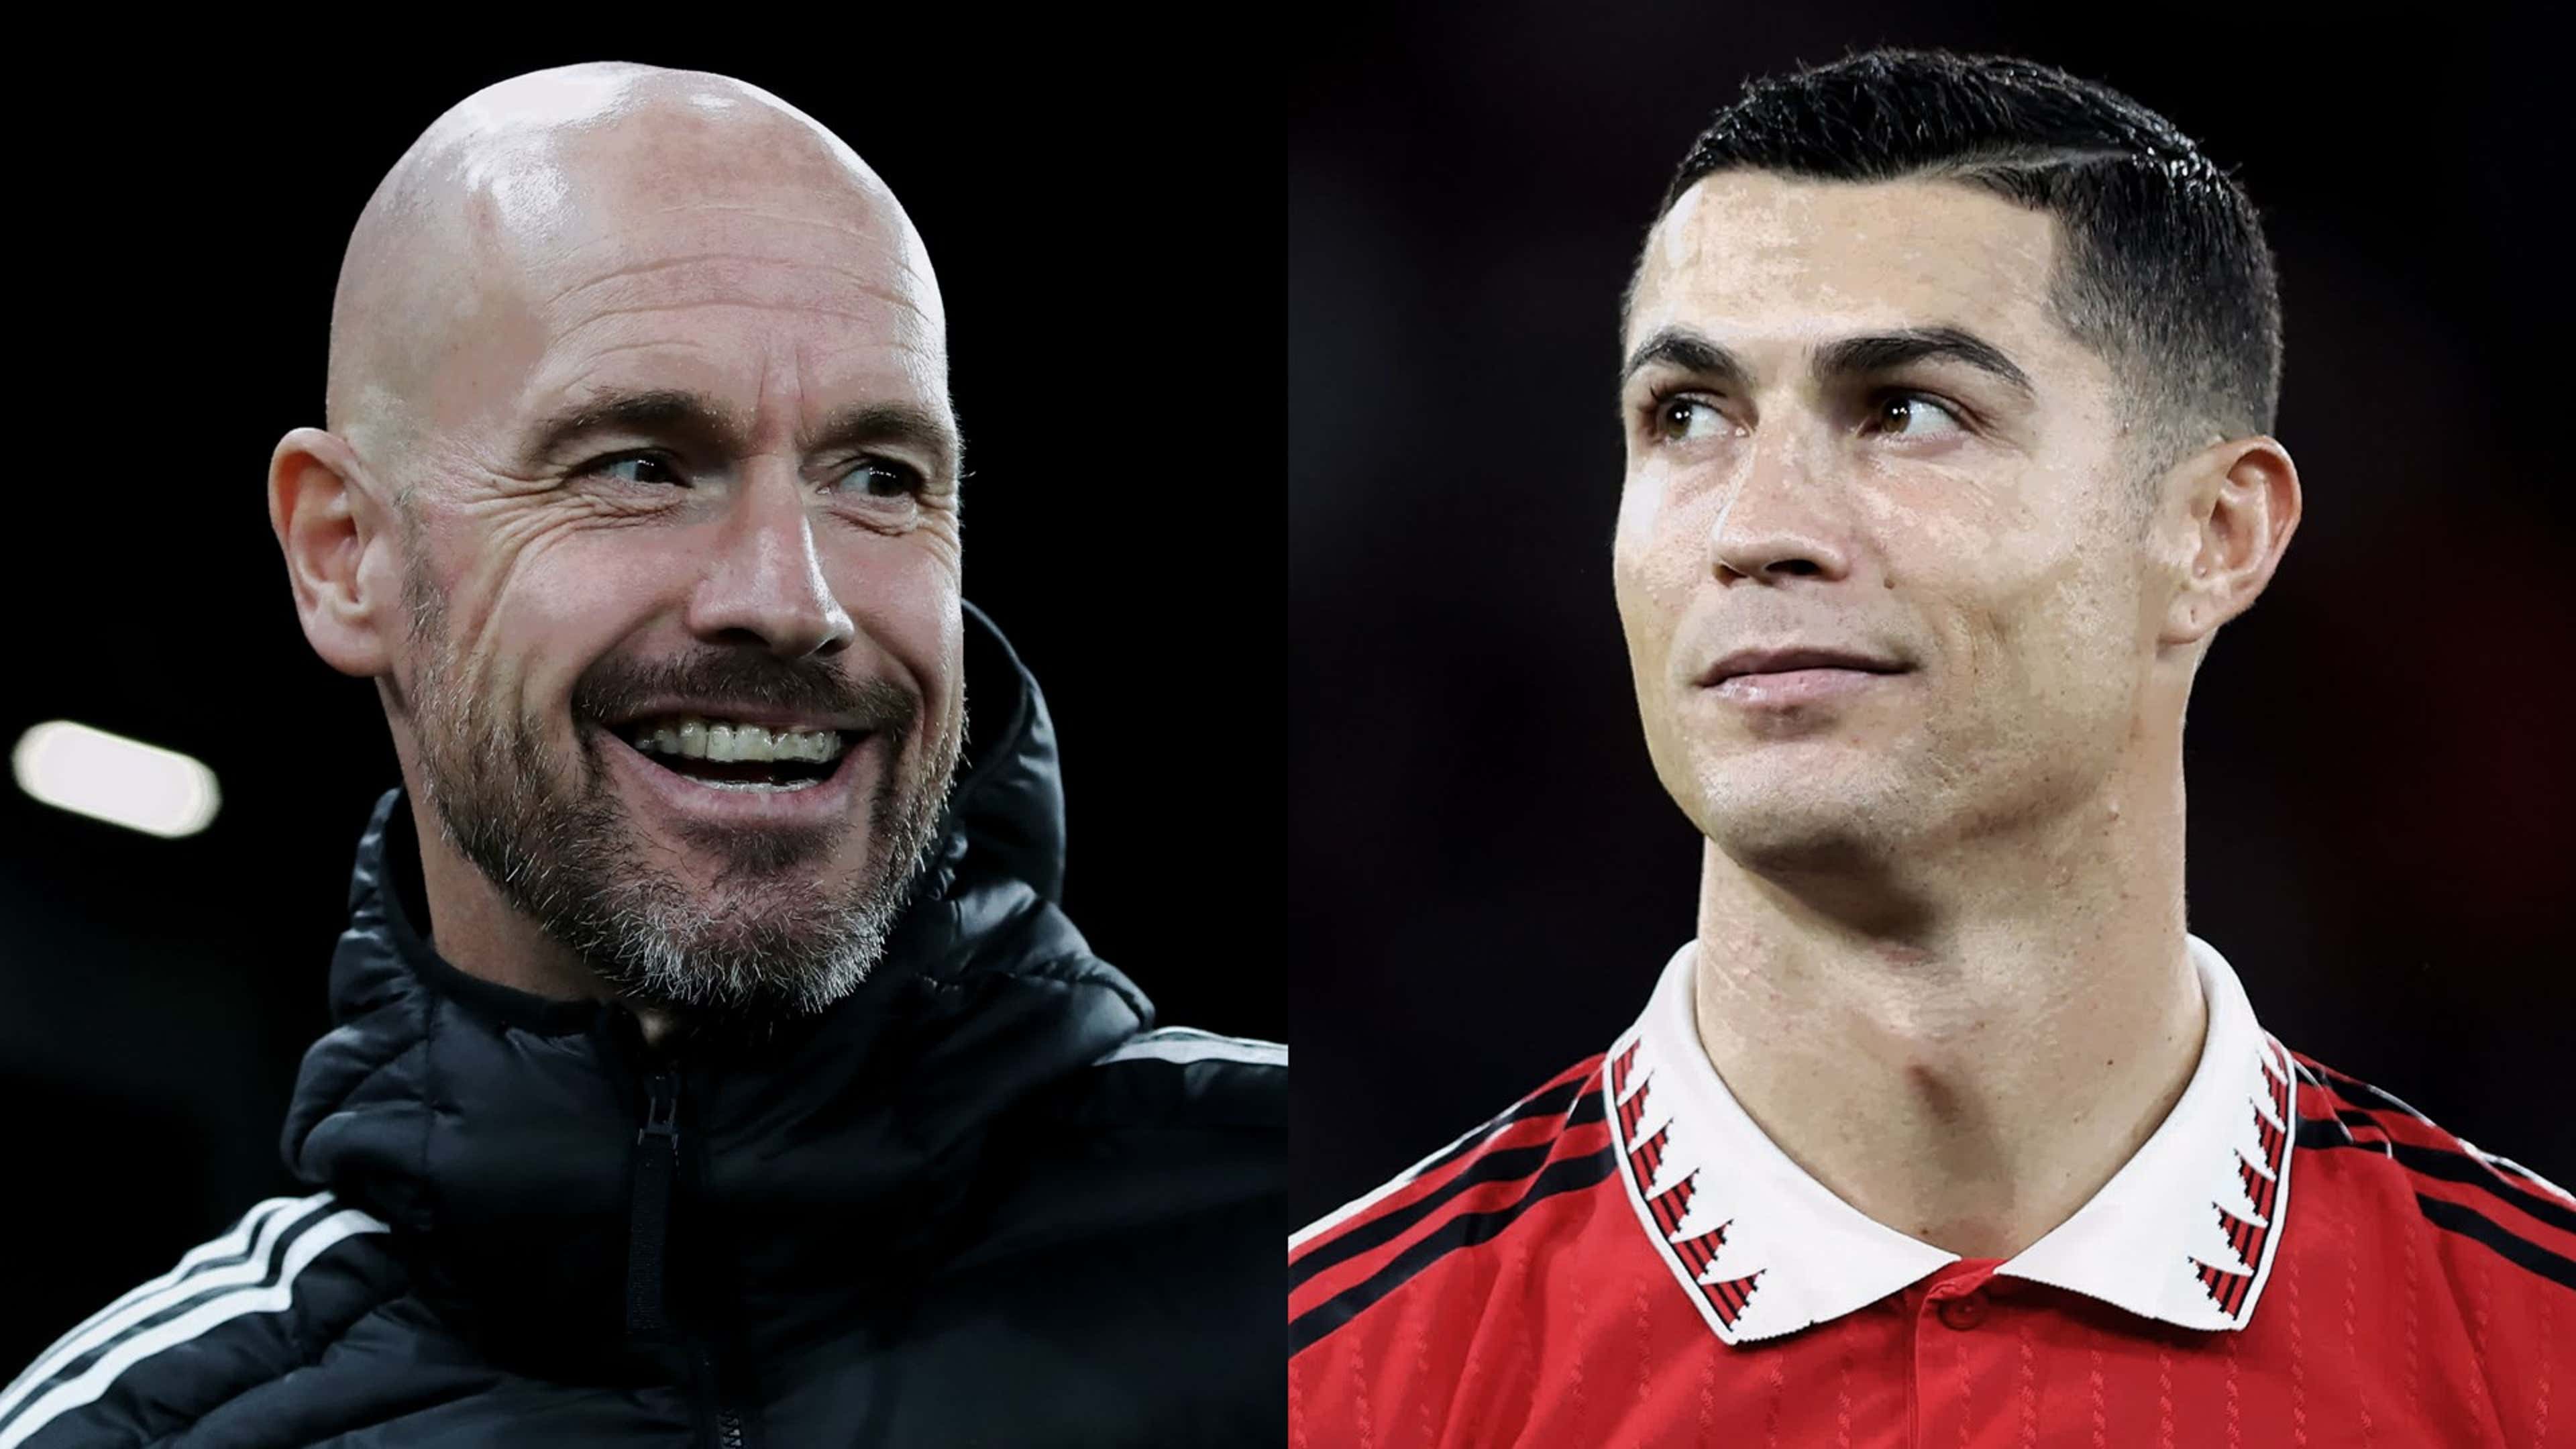 Manchester United has introduced a Ronaldo rule that will limit the  salaries of players (Jan. 8, 2023) —